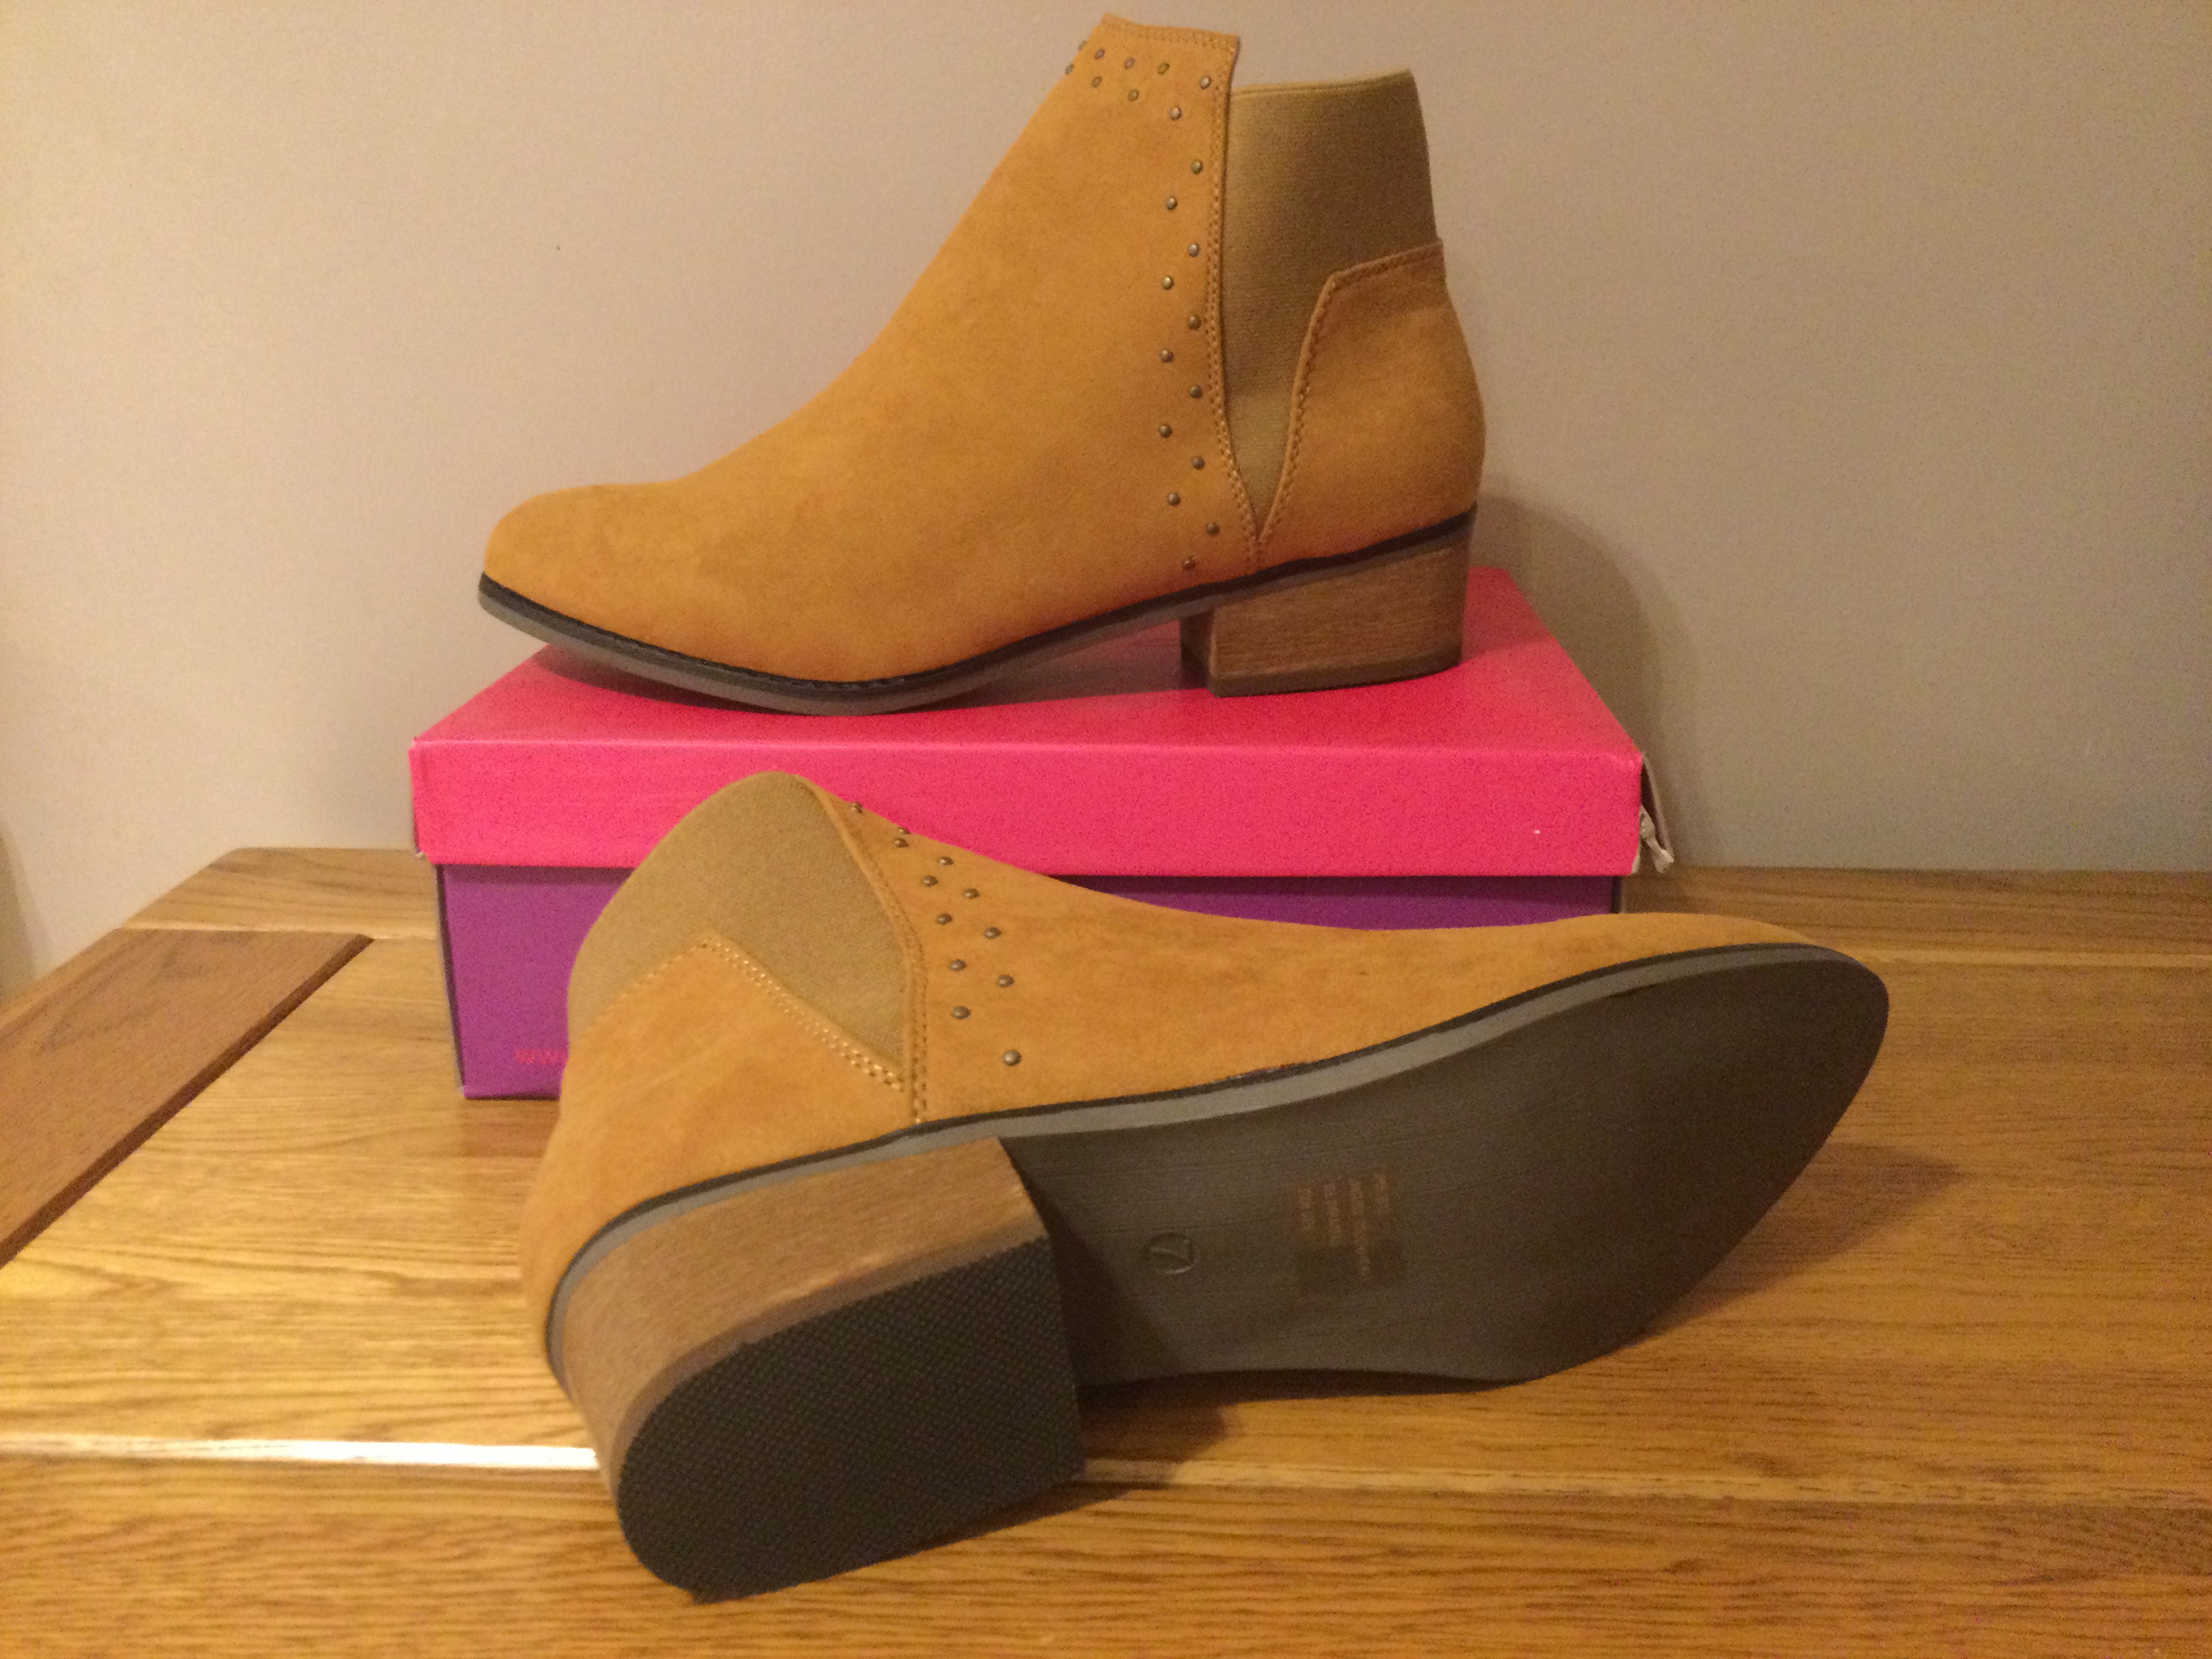 Dolcis “Wendy” Ankle Boots, Size 7, Tan - New RRP £45.00 - Image 4 of 6